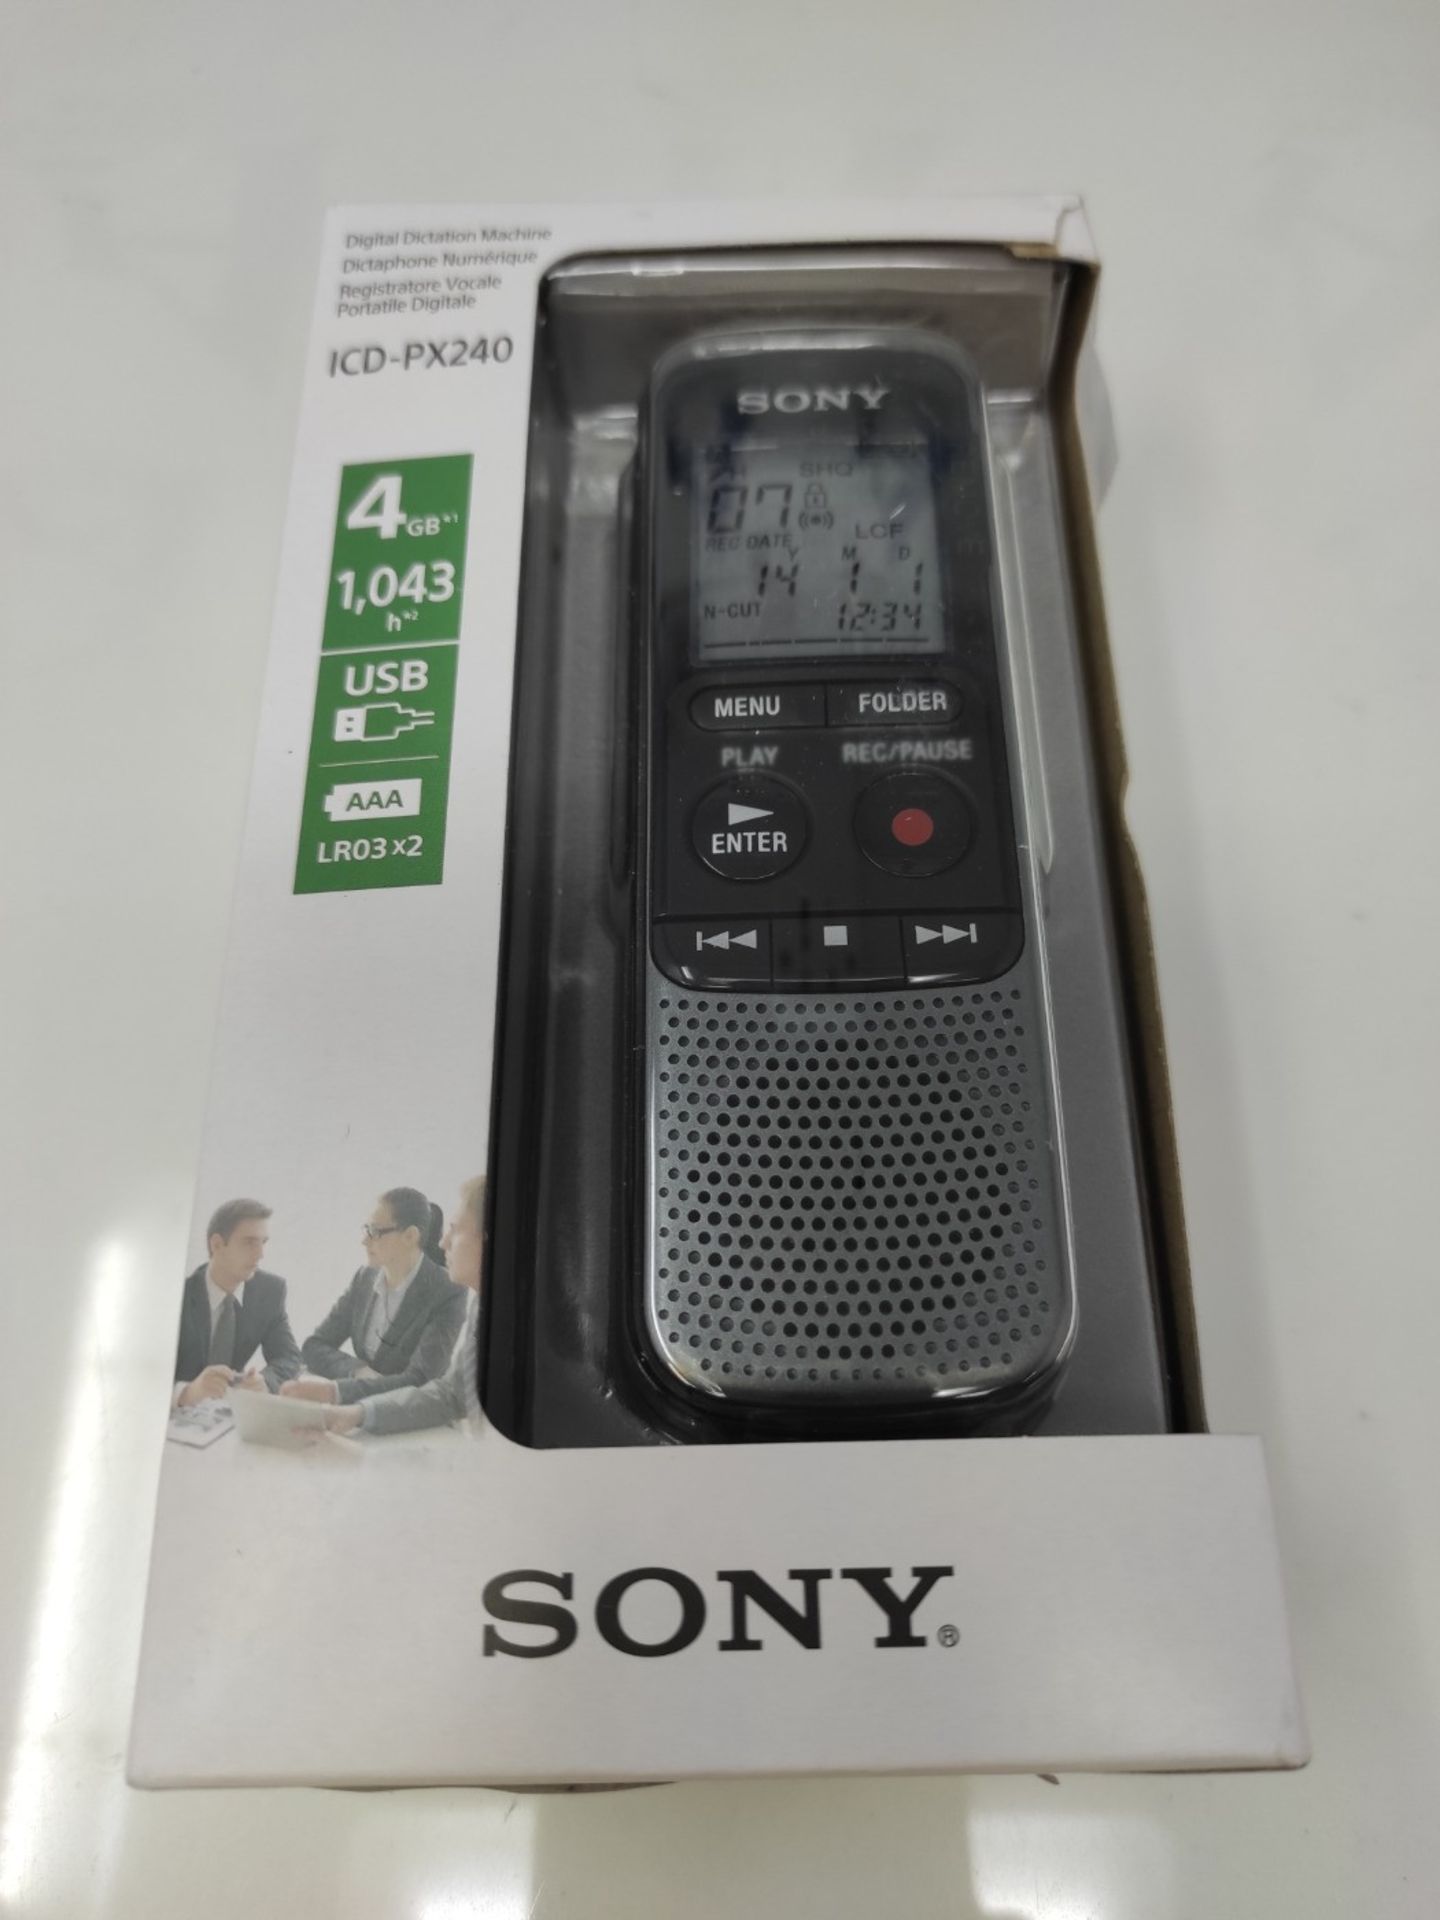 [NEW] Sony ICD-PX240 Digital Mono Recorder, Built-in Speaker, Headphone and Microphone - Image 2 of 2